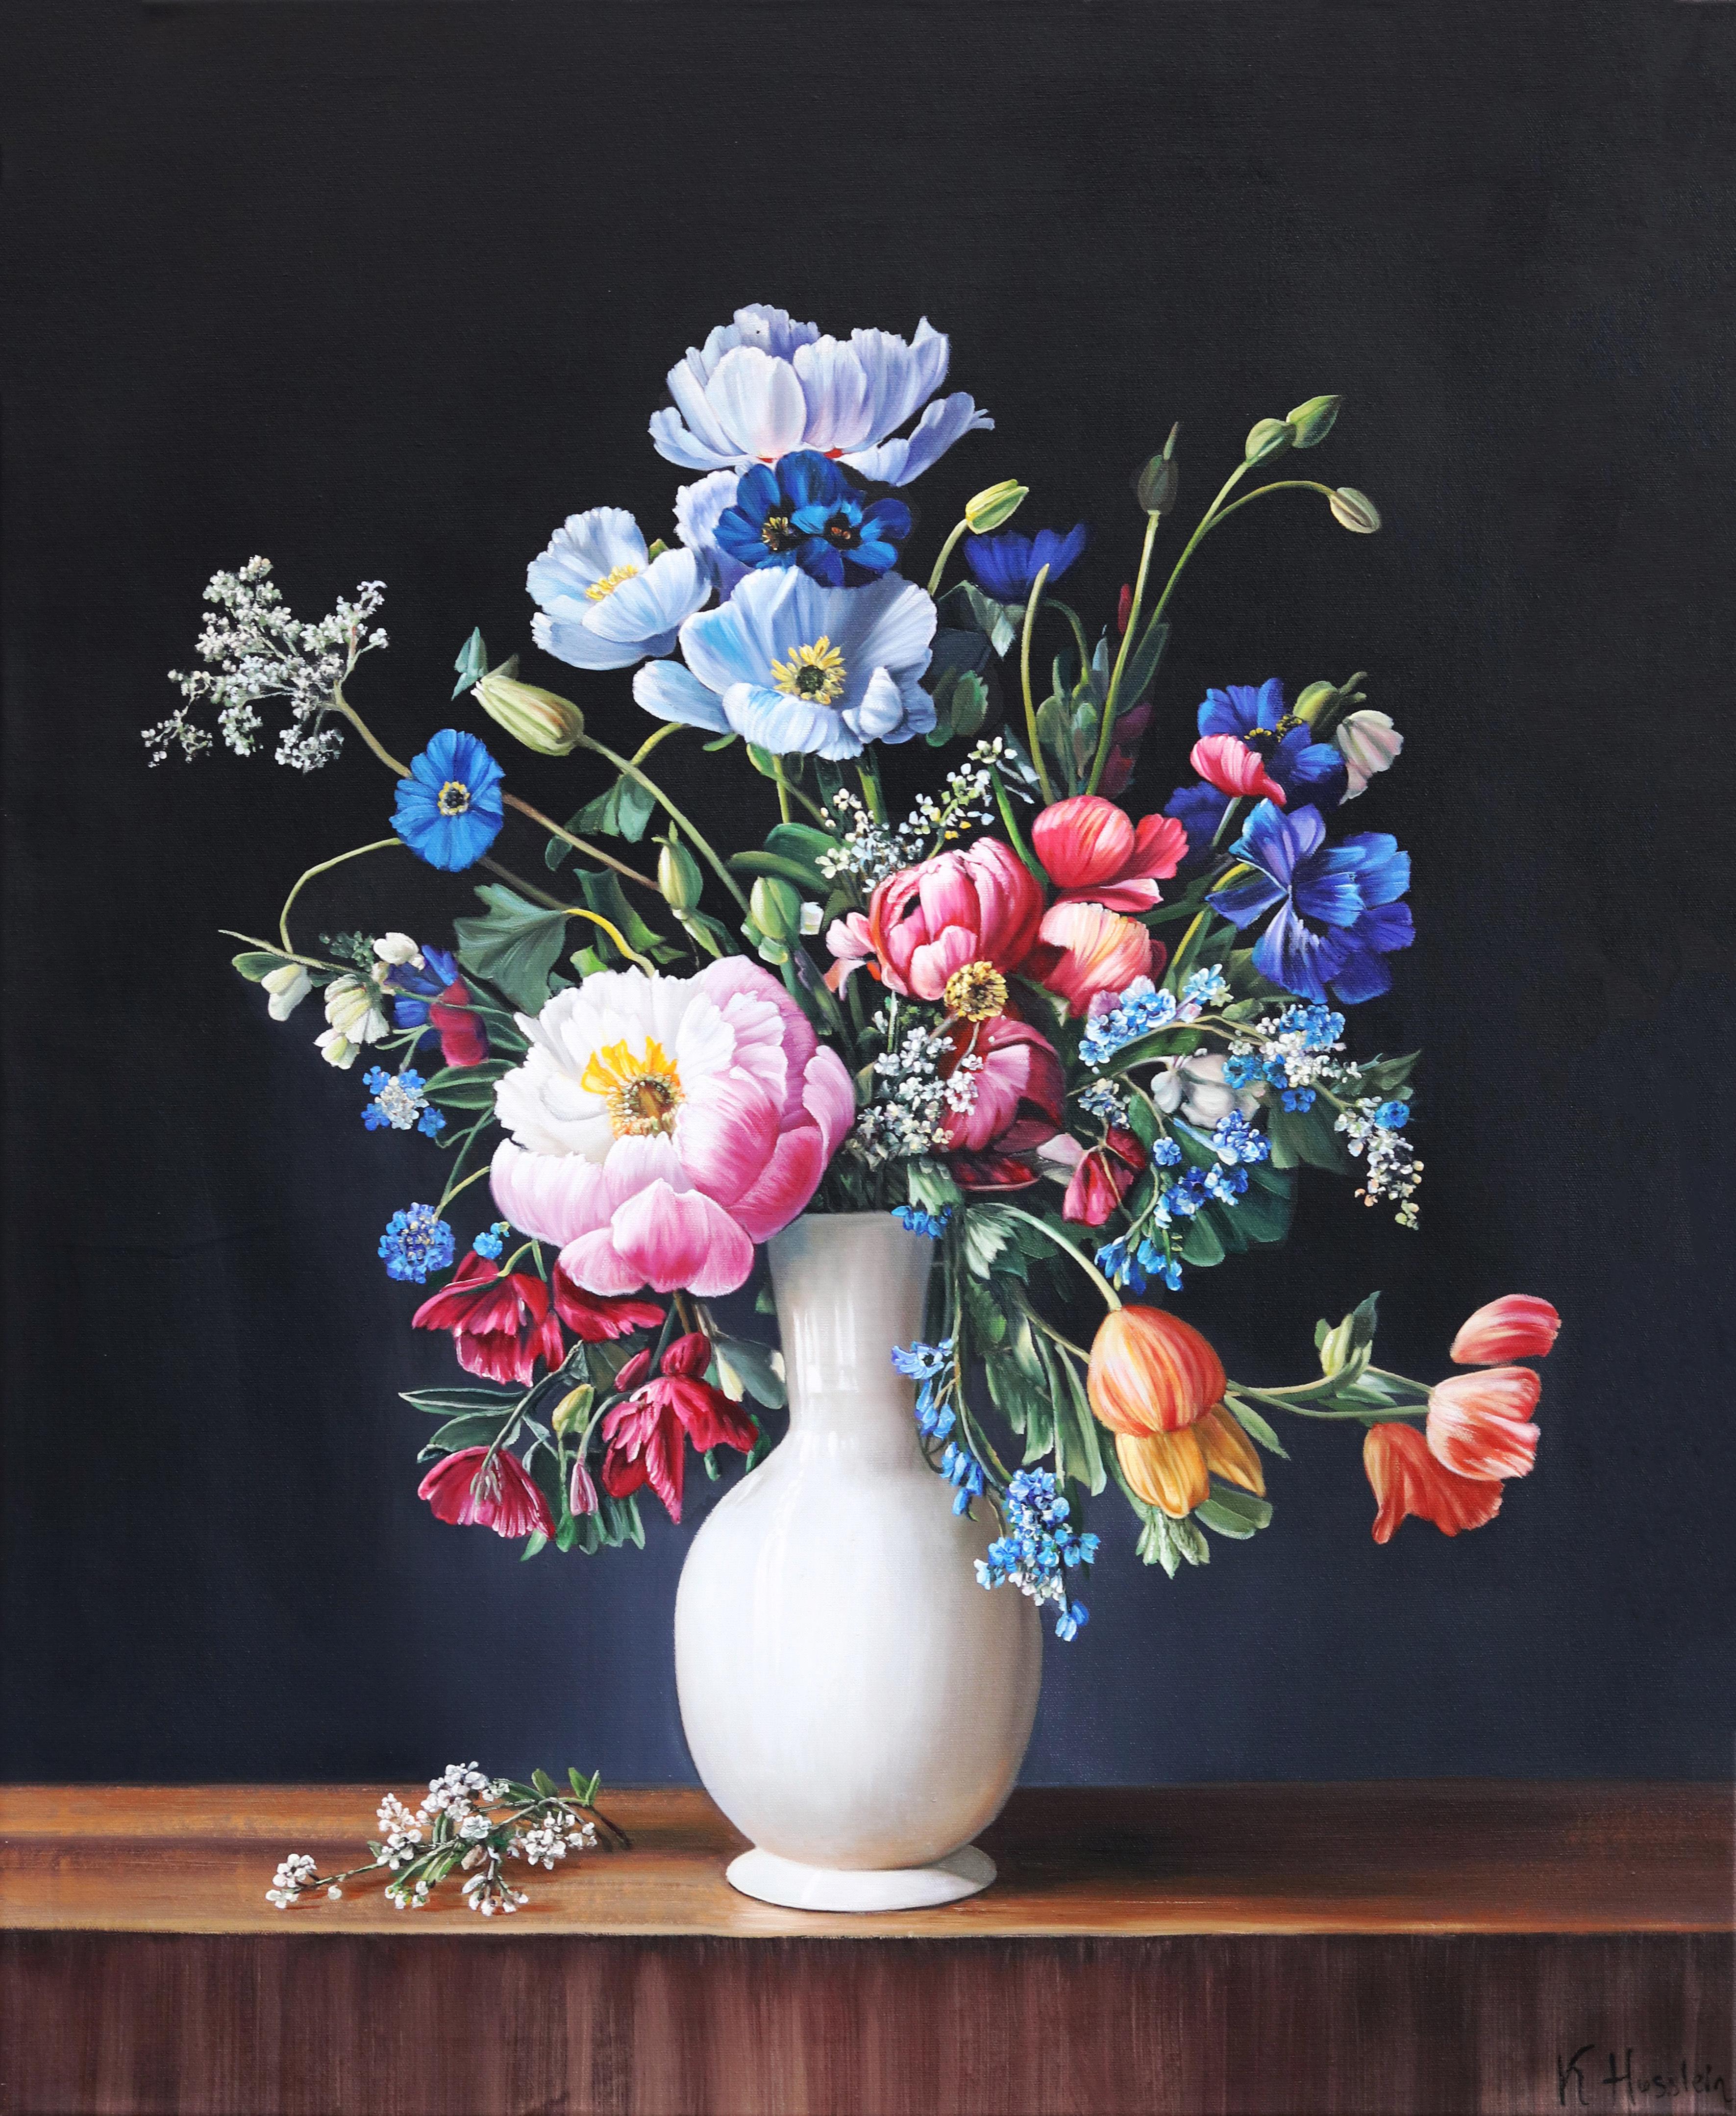 Katharina Husslein Still-Life Painting - No Other Sun Has Lit Up My Heaven - Hyperrealist Floral Still Life Oil Painting